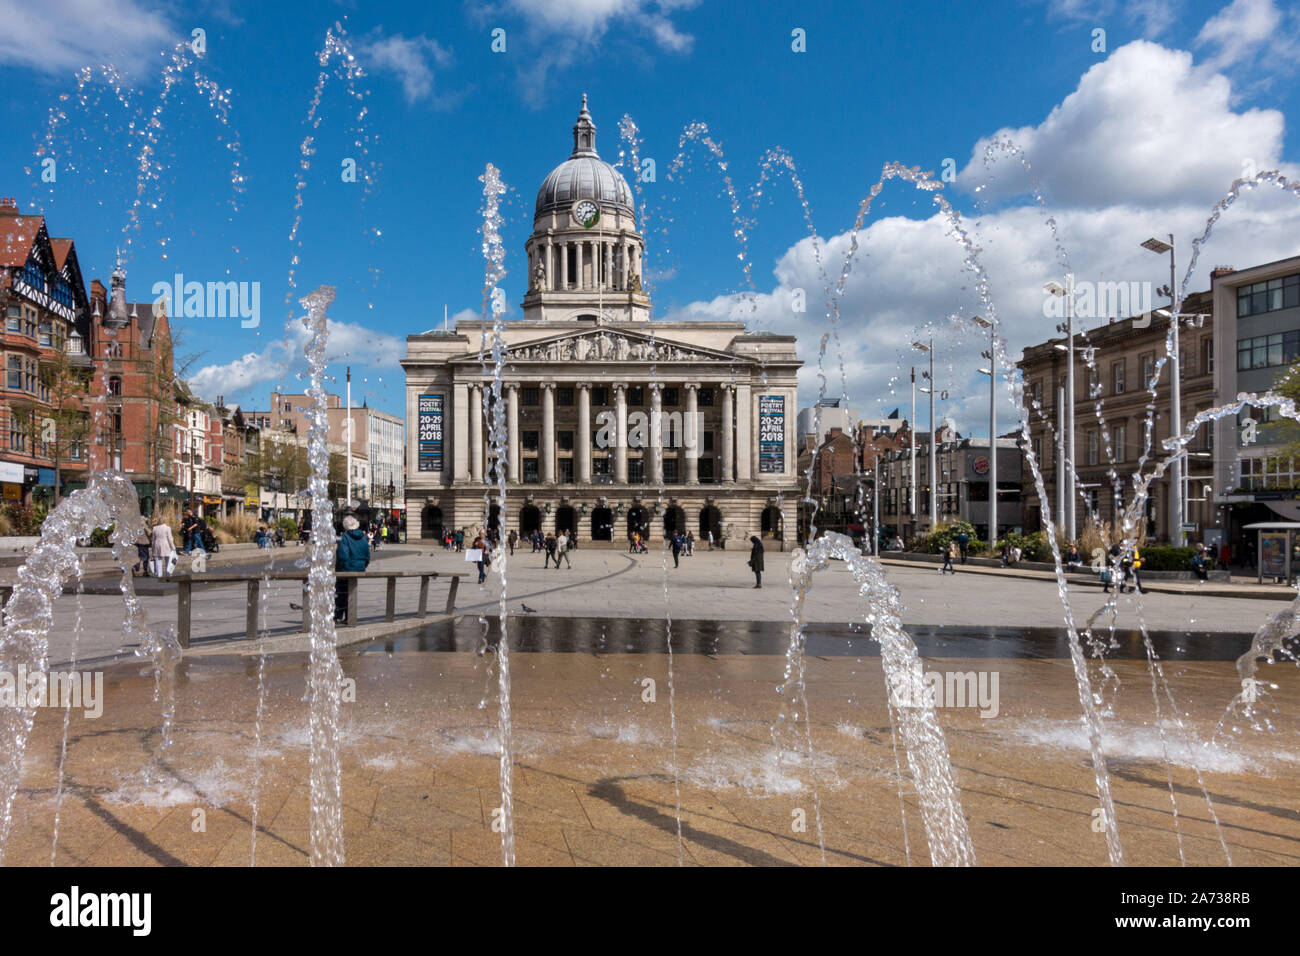 Water feature in Old Market Square with Nottingham Council House building in the background, Nottingham City, England, UK. Stock Photo